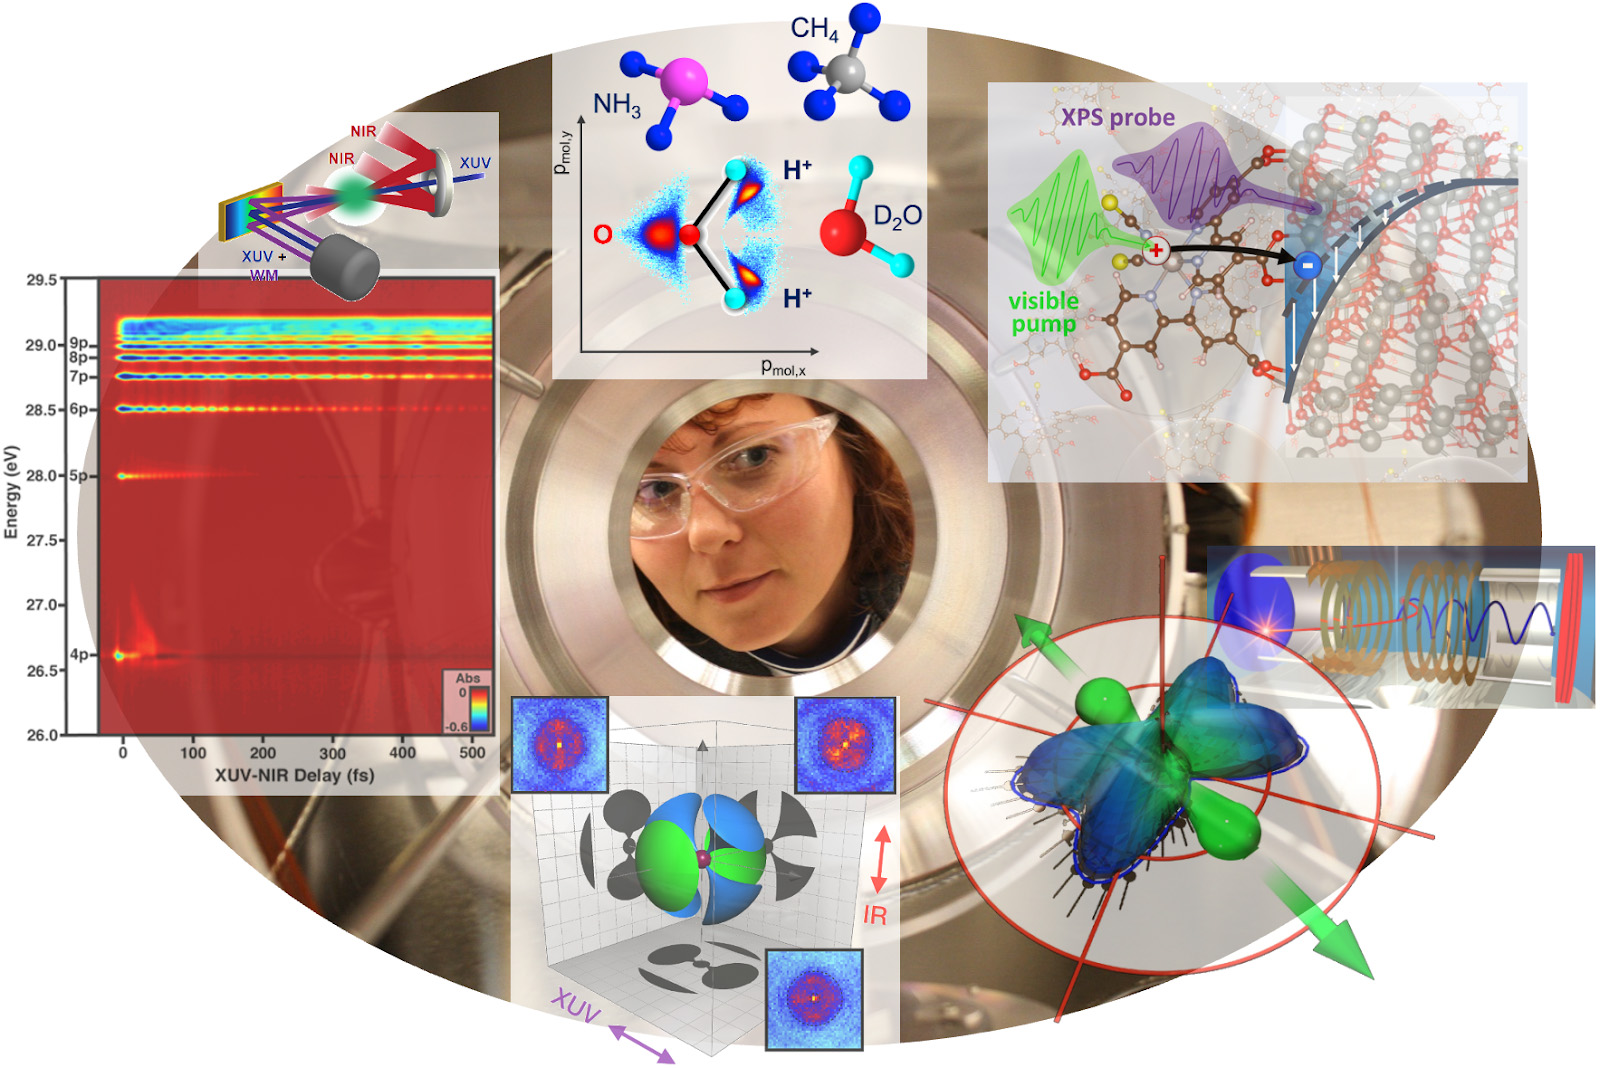 Face of person looking into machine, overlaid by many abstract data visualizations